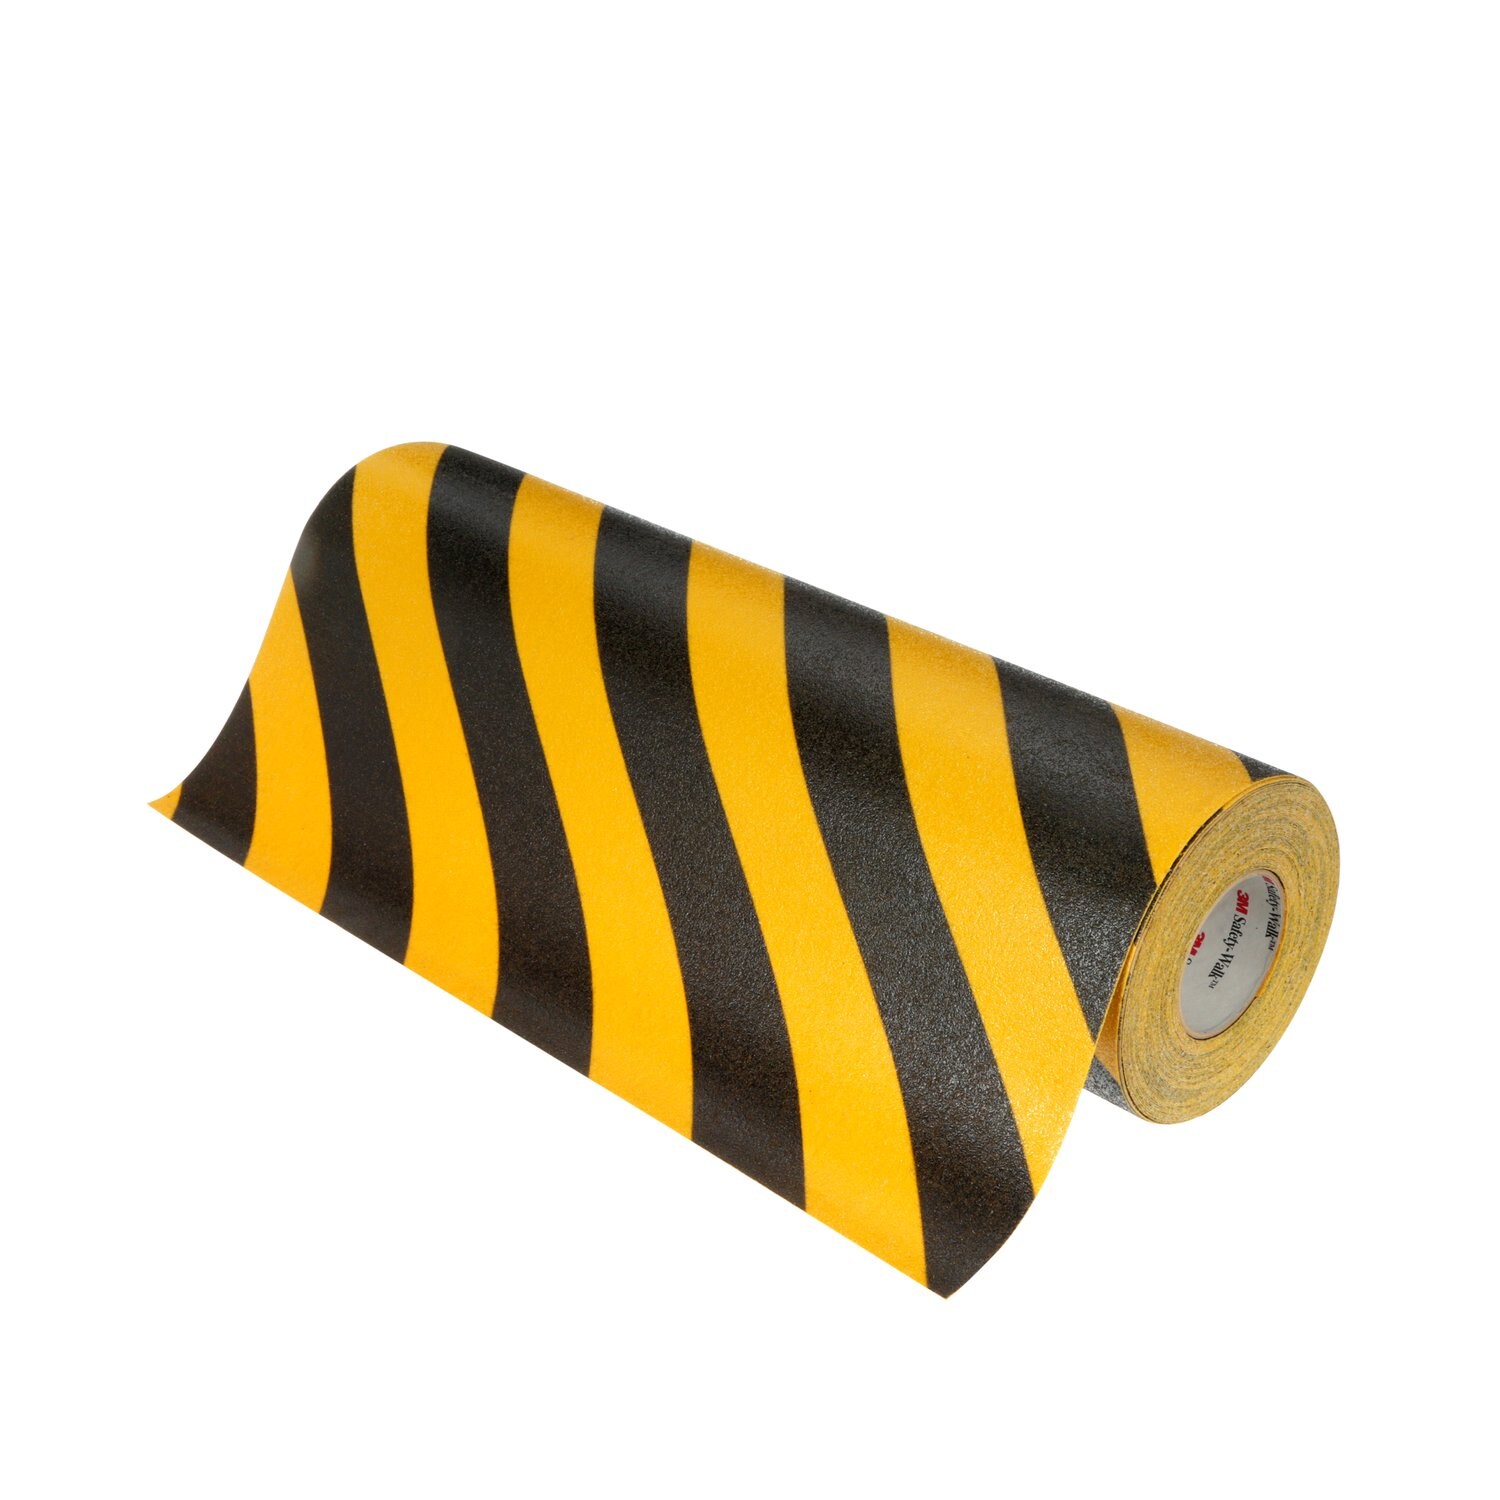 7100133324 - 3M Safety-Walk Slip-Resistant General Purpose Tapes & Treads 613,
Black/Yellow Stripe, 1 in x 60 ft, Roll, 4/Case